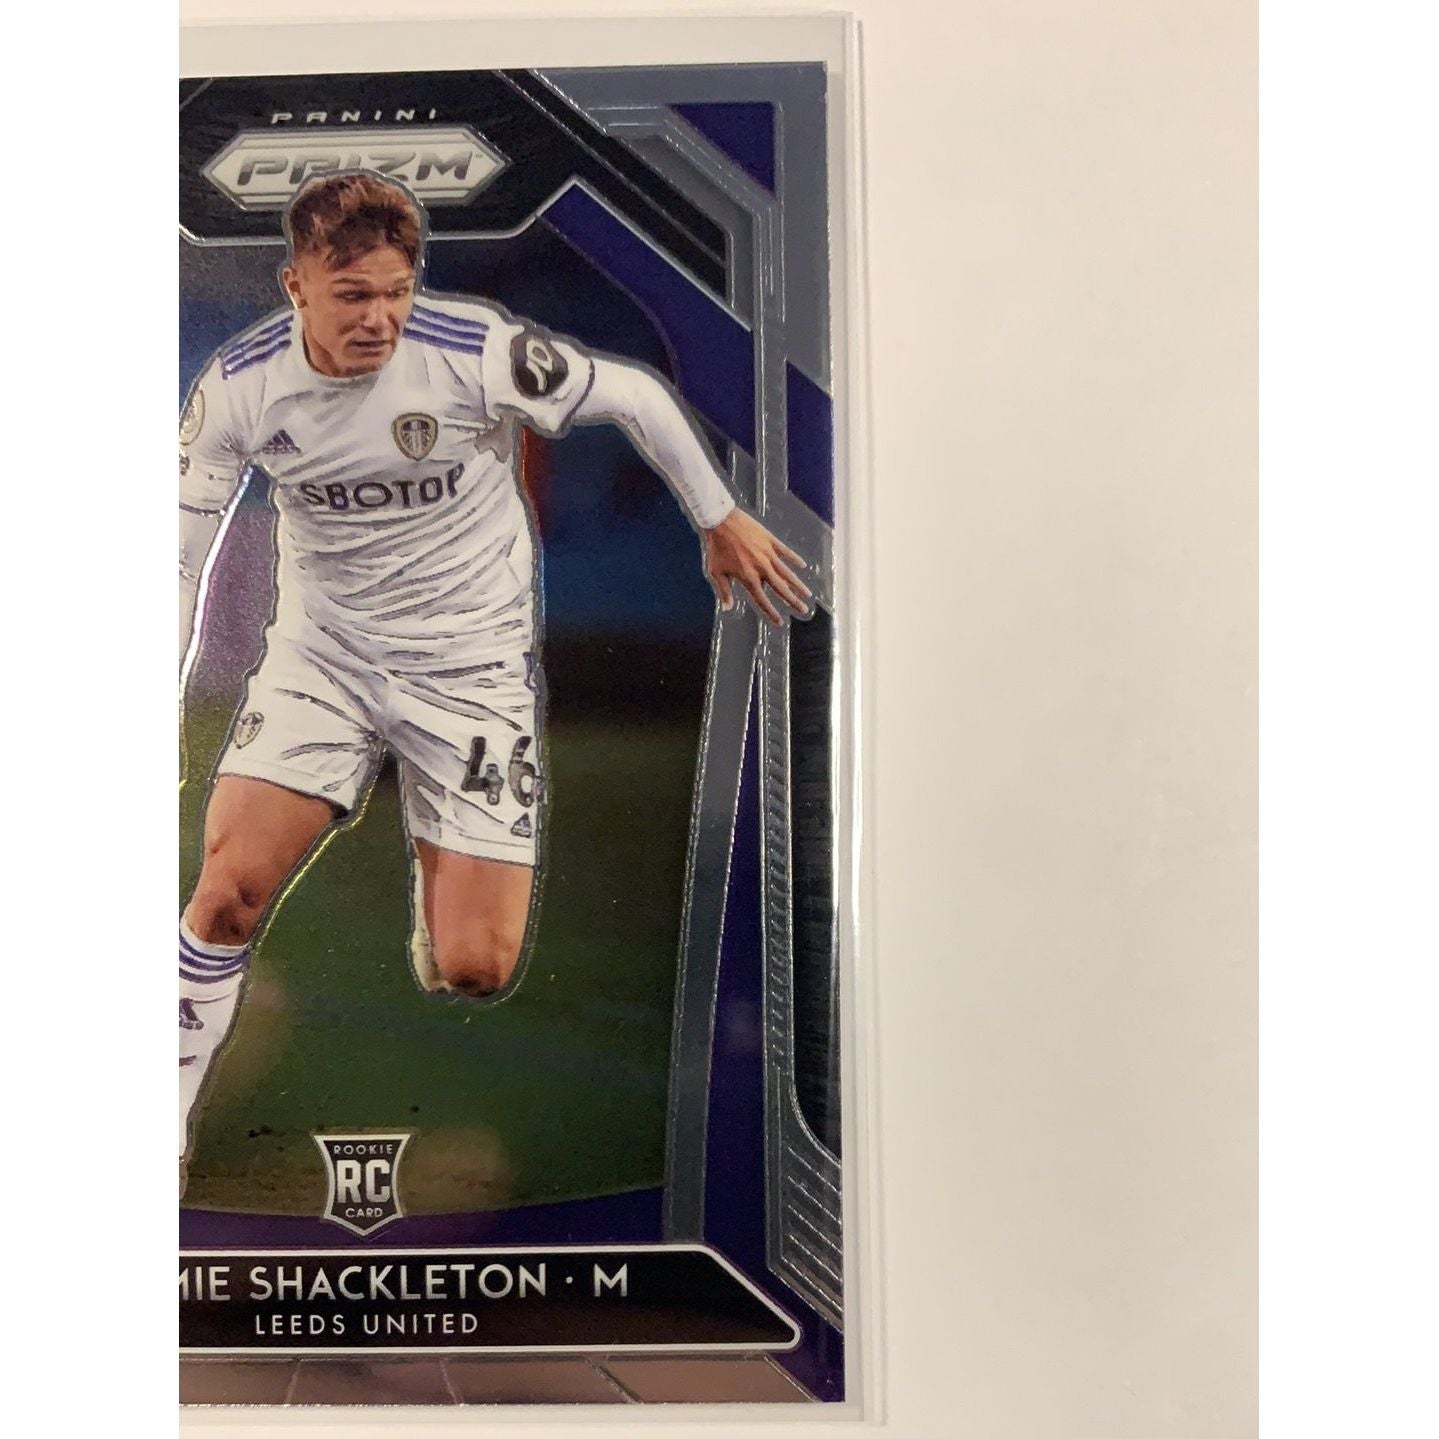  2021 Topps Chrome UEFA Jamie Shackleton  Local Legends Cards & Collectibles